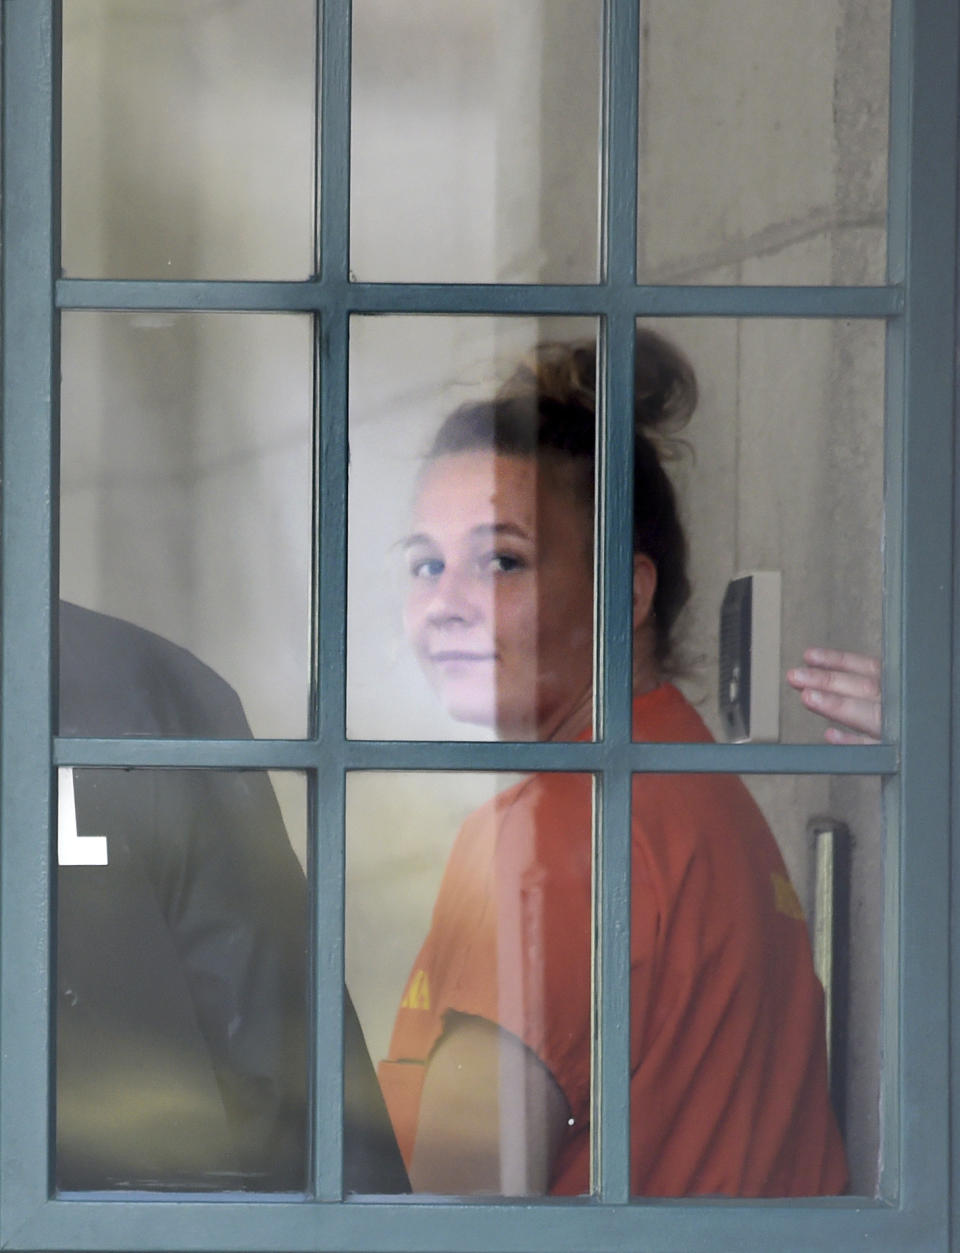 Reality Winner, who pleaded guilty to mailing a classified U.S. report to a news organization, walks out of a courthouse in Augusta, Ga., Thursday, Aug. 23, 2018, after being sentenced to more than five years in prison. (Michael Holahan/The Augusta Chronicle via AP)